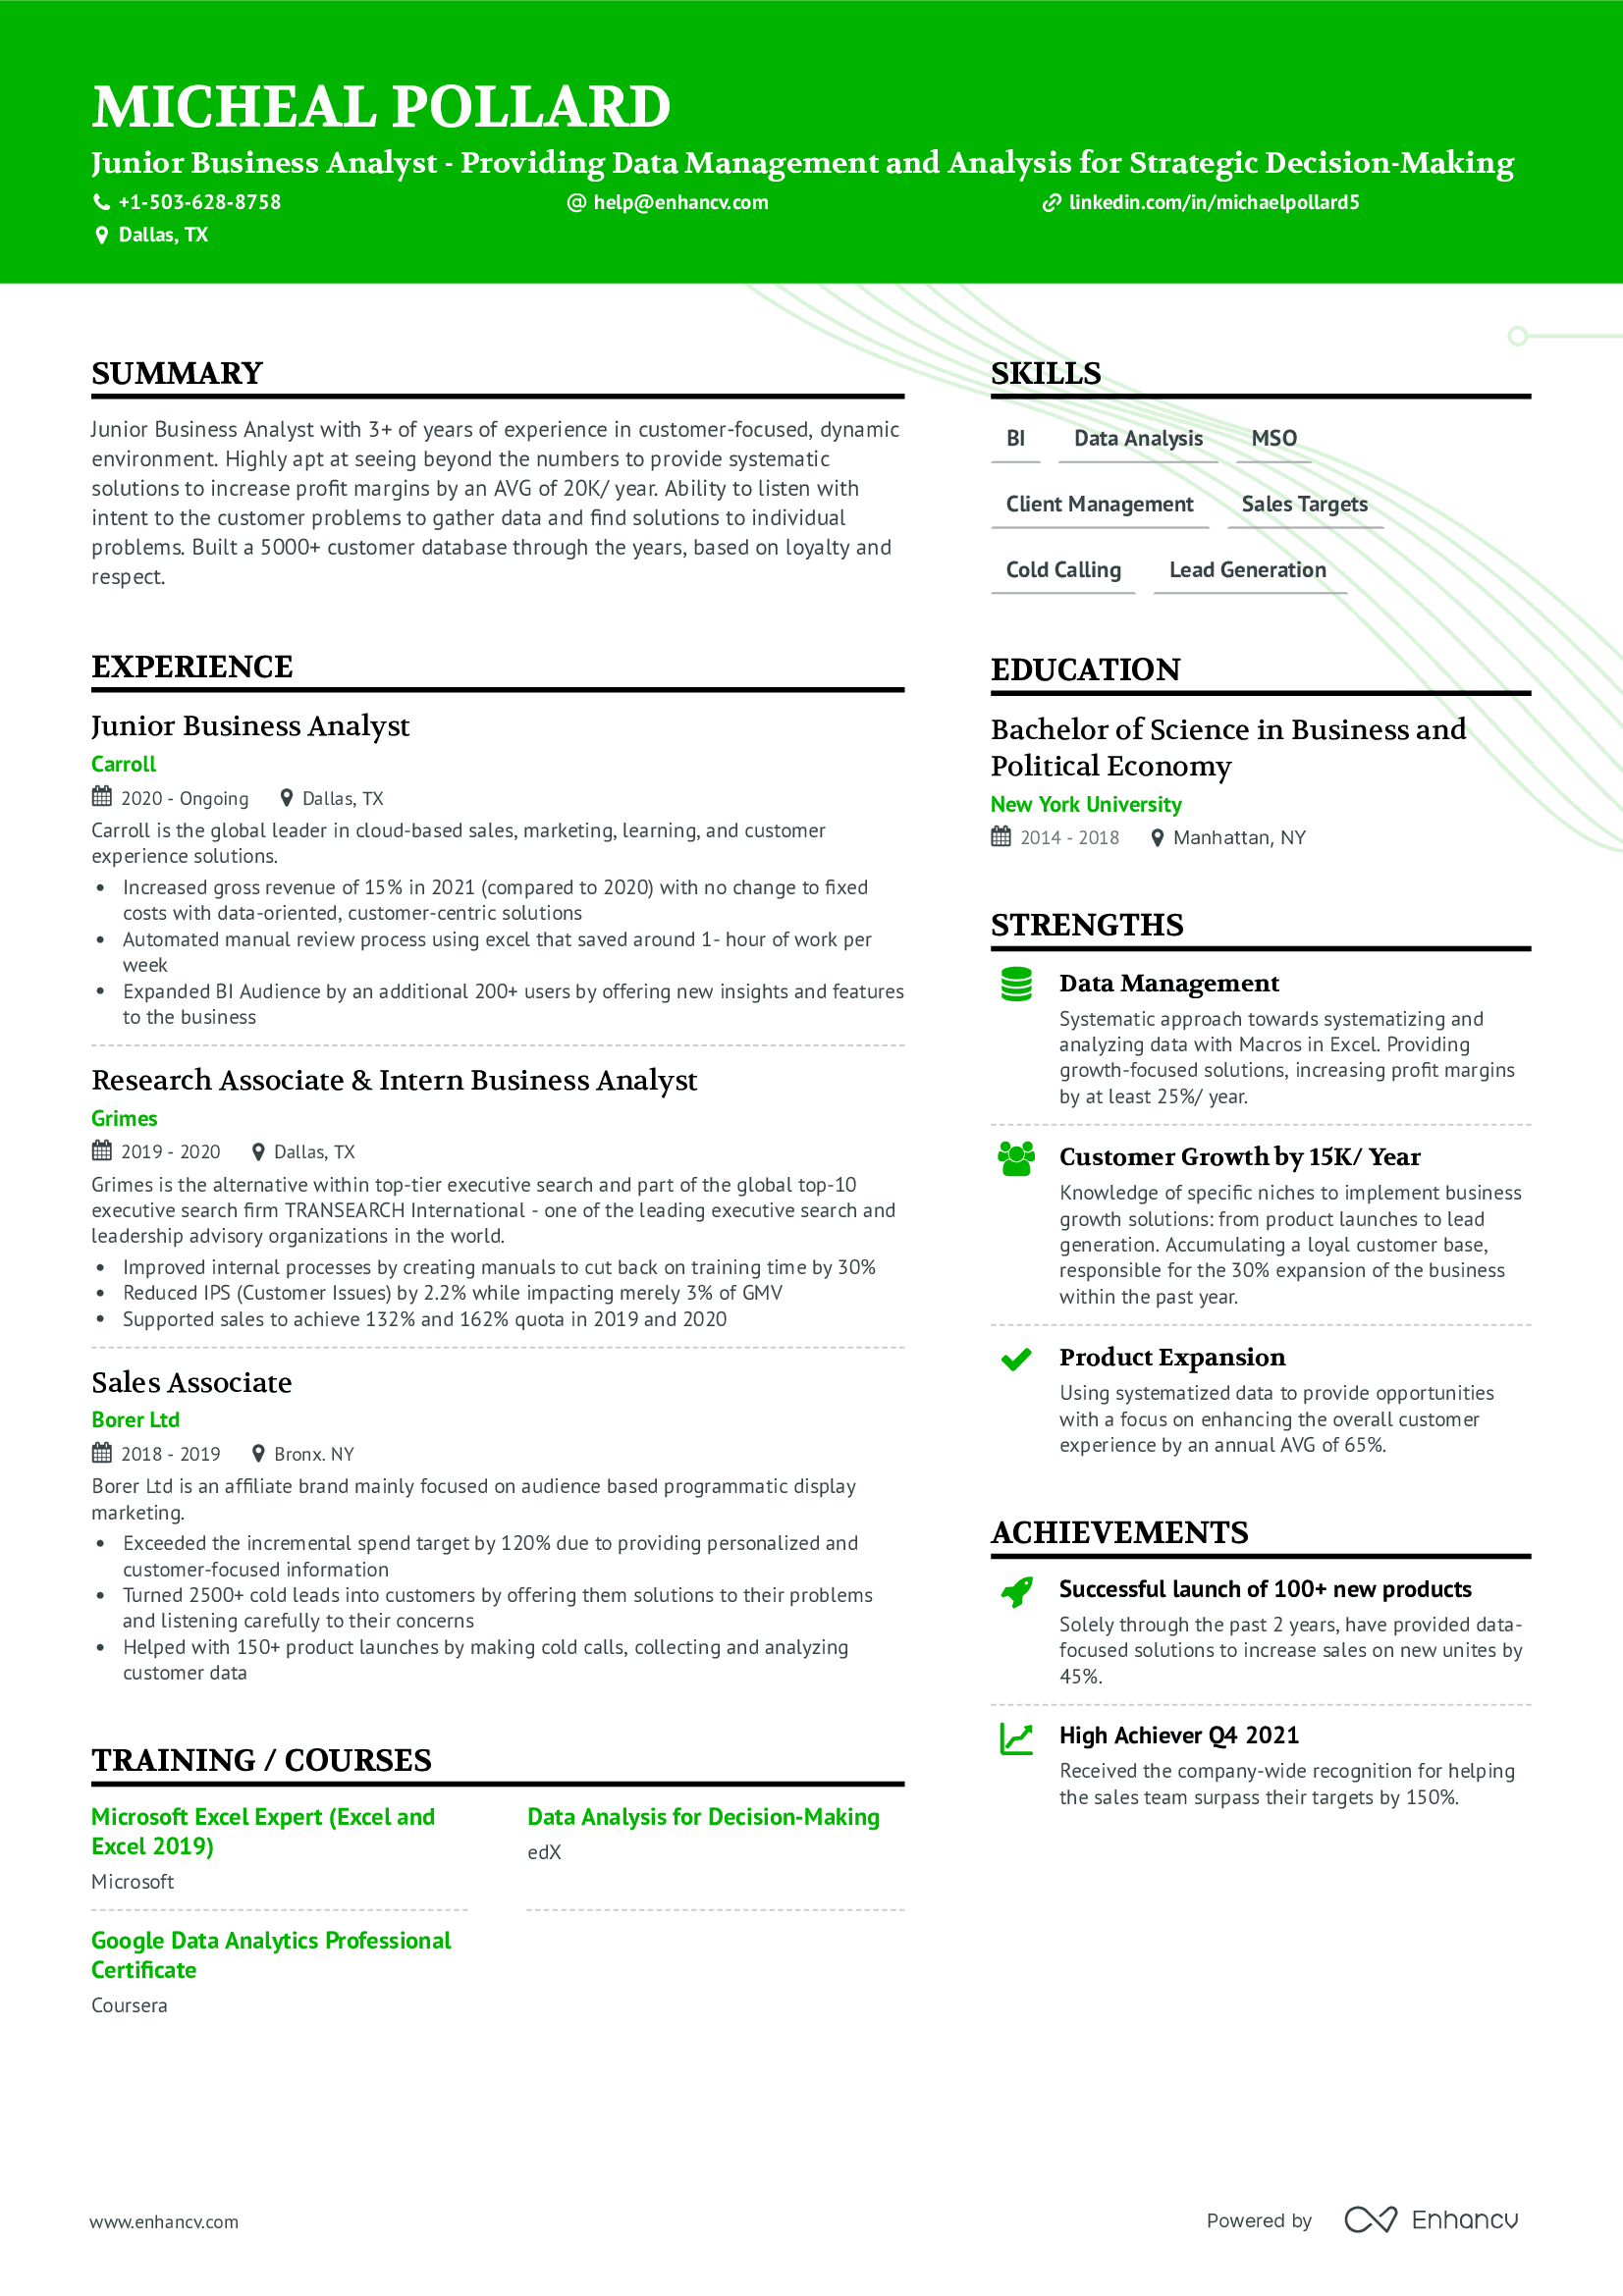 Junior Business Analyst resume.png